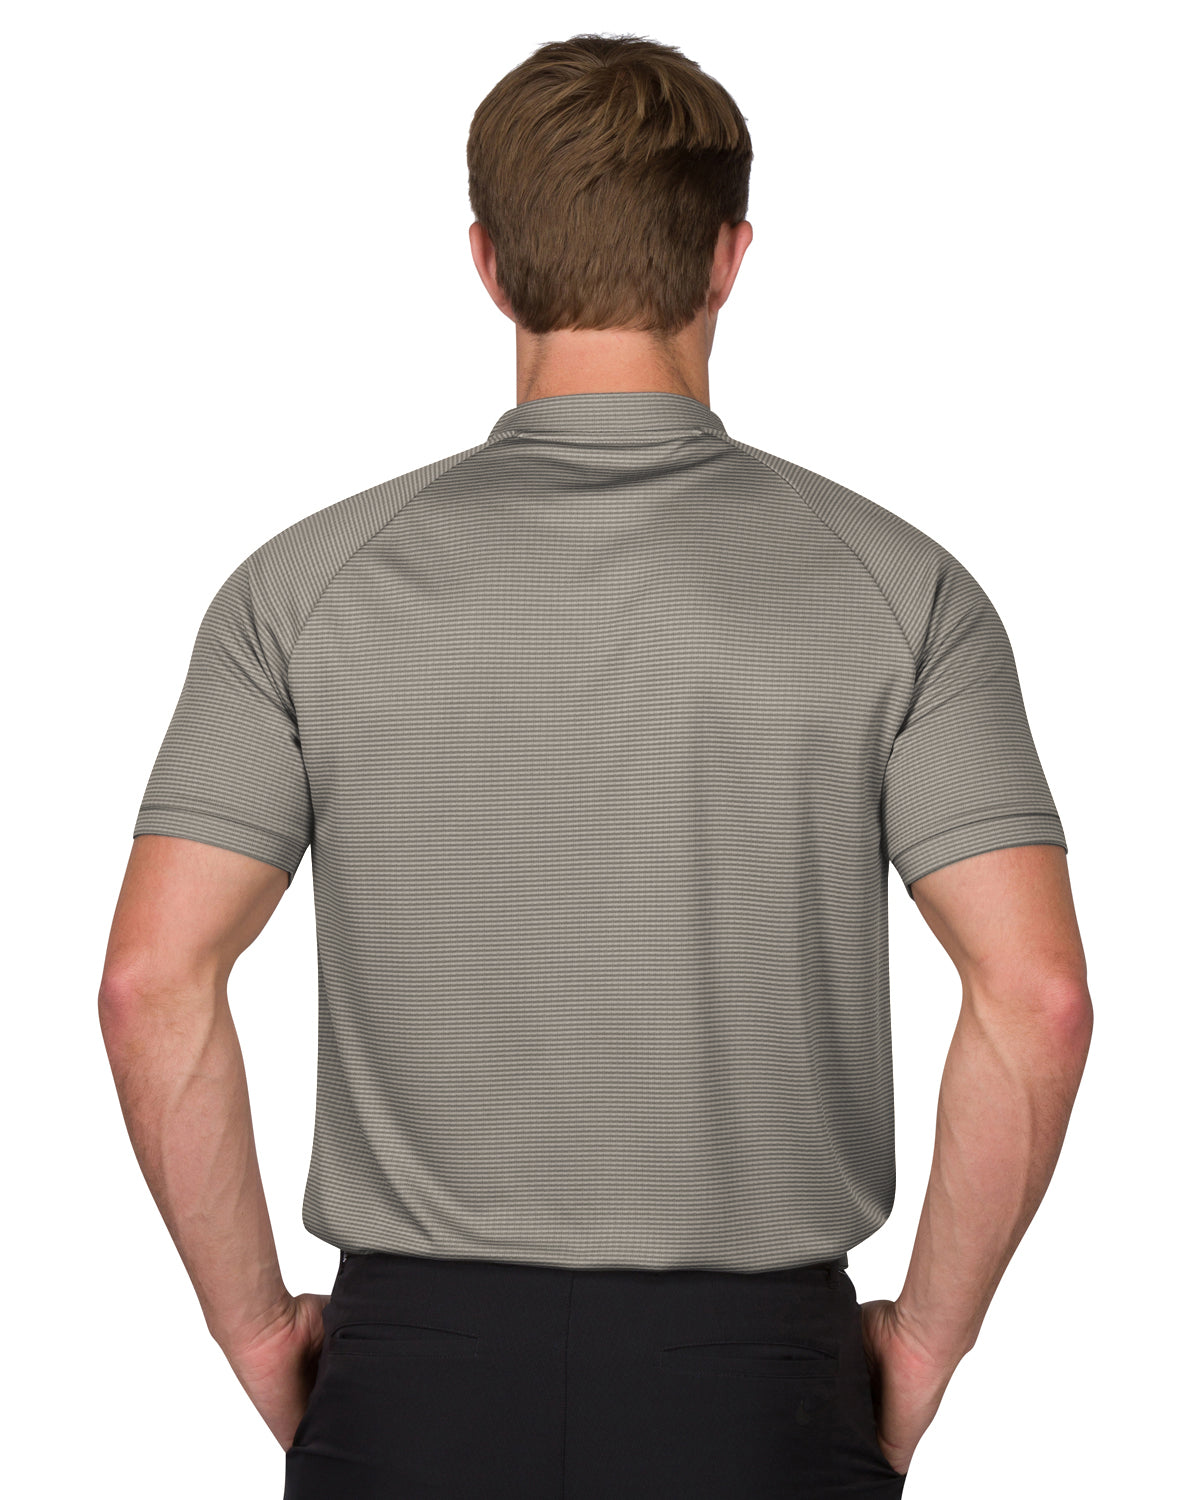 EXTREME DEAL - MEN'S THIN-STRIPED COLLARLESS GOLF POLOS